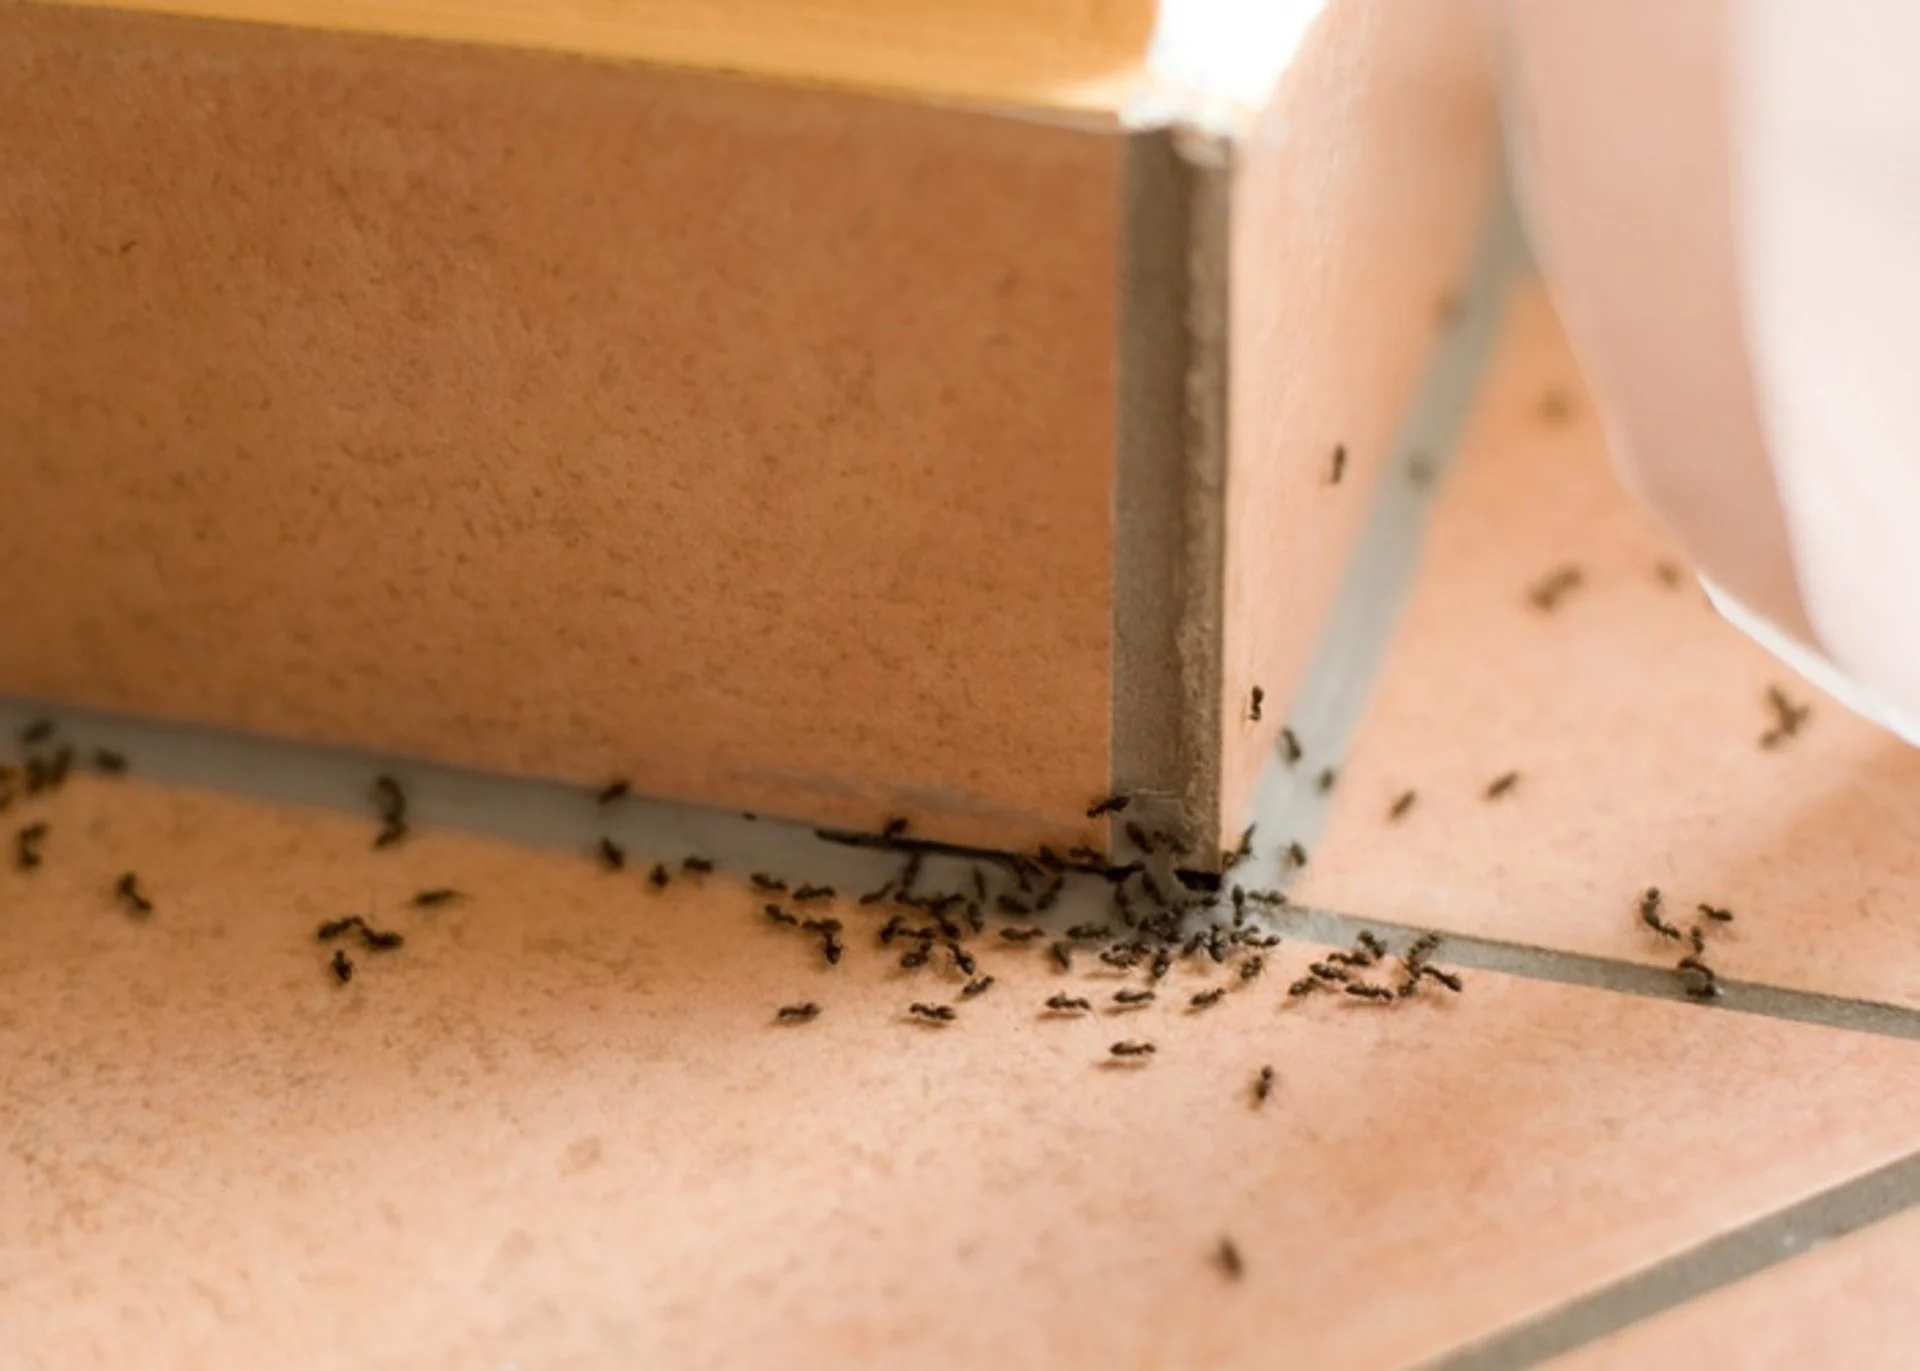 They're back! Five ways to keep ants out of your home